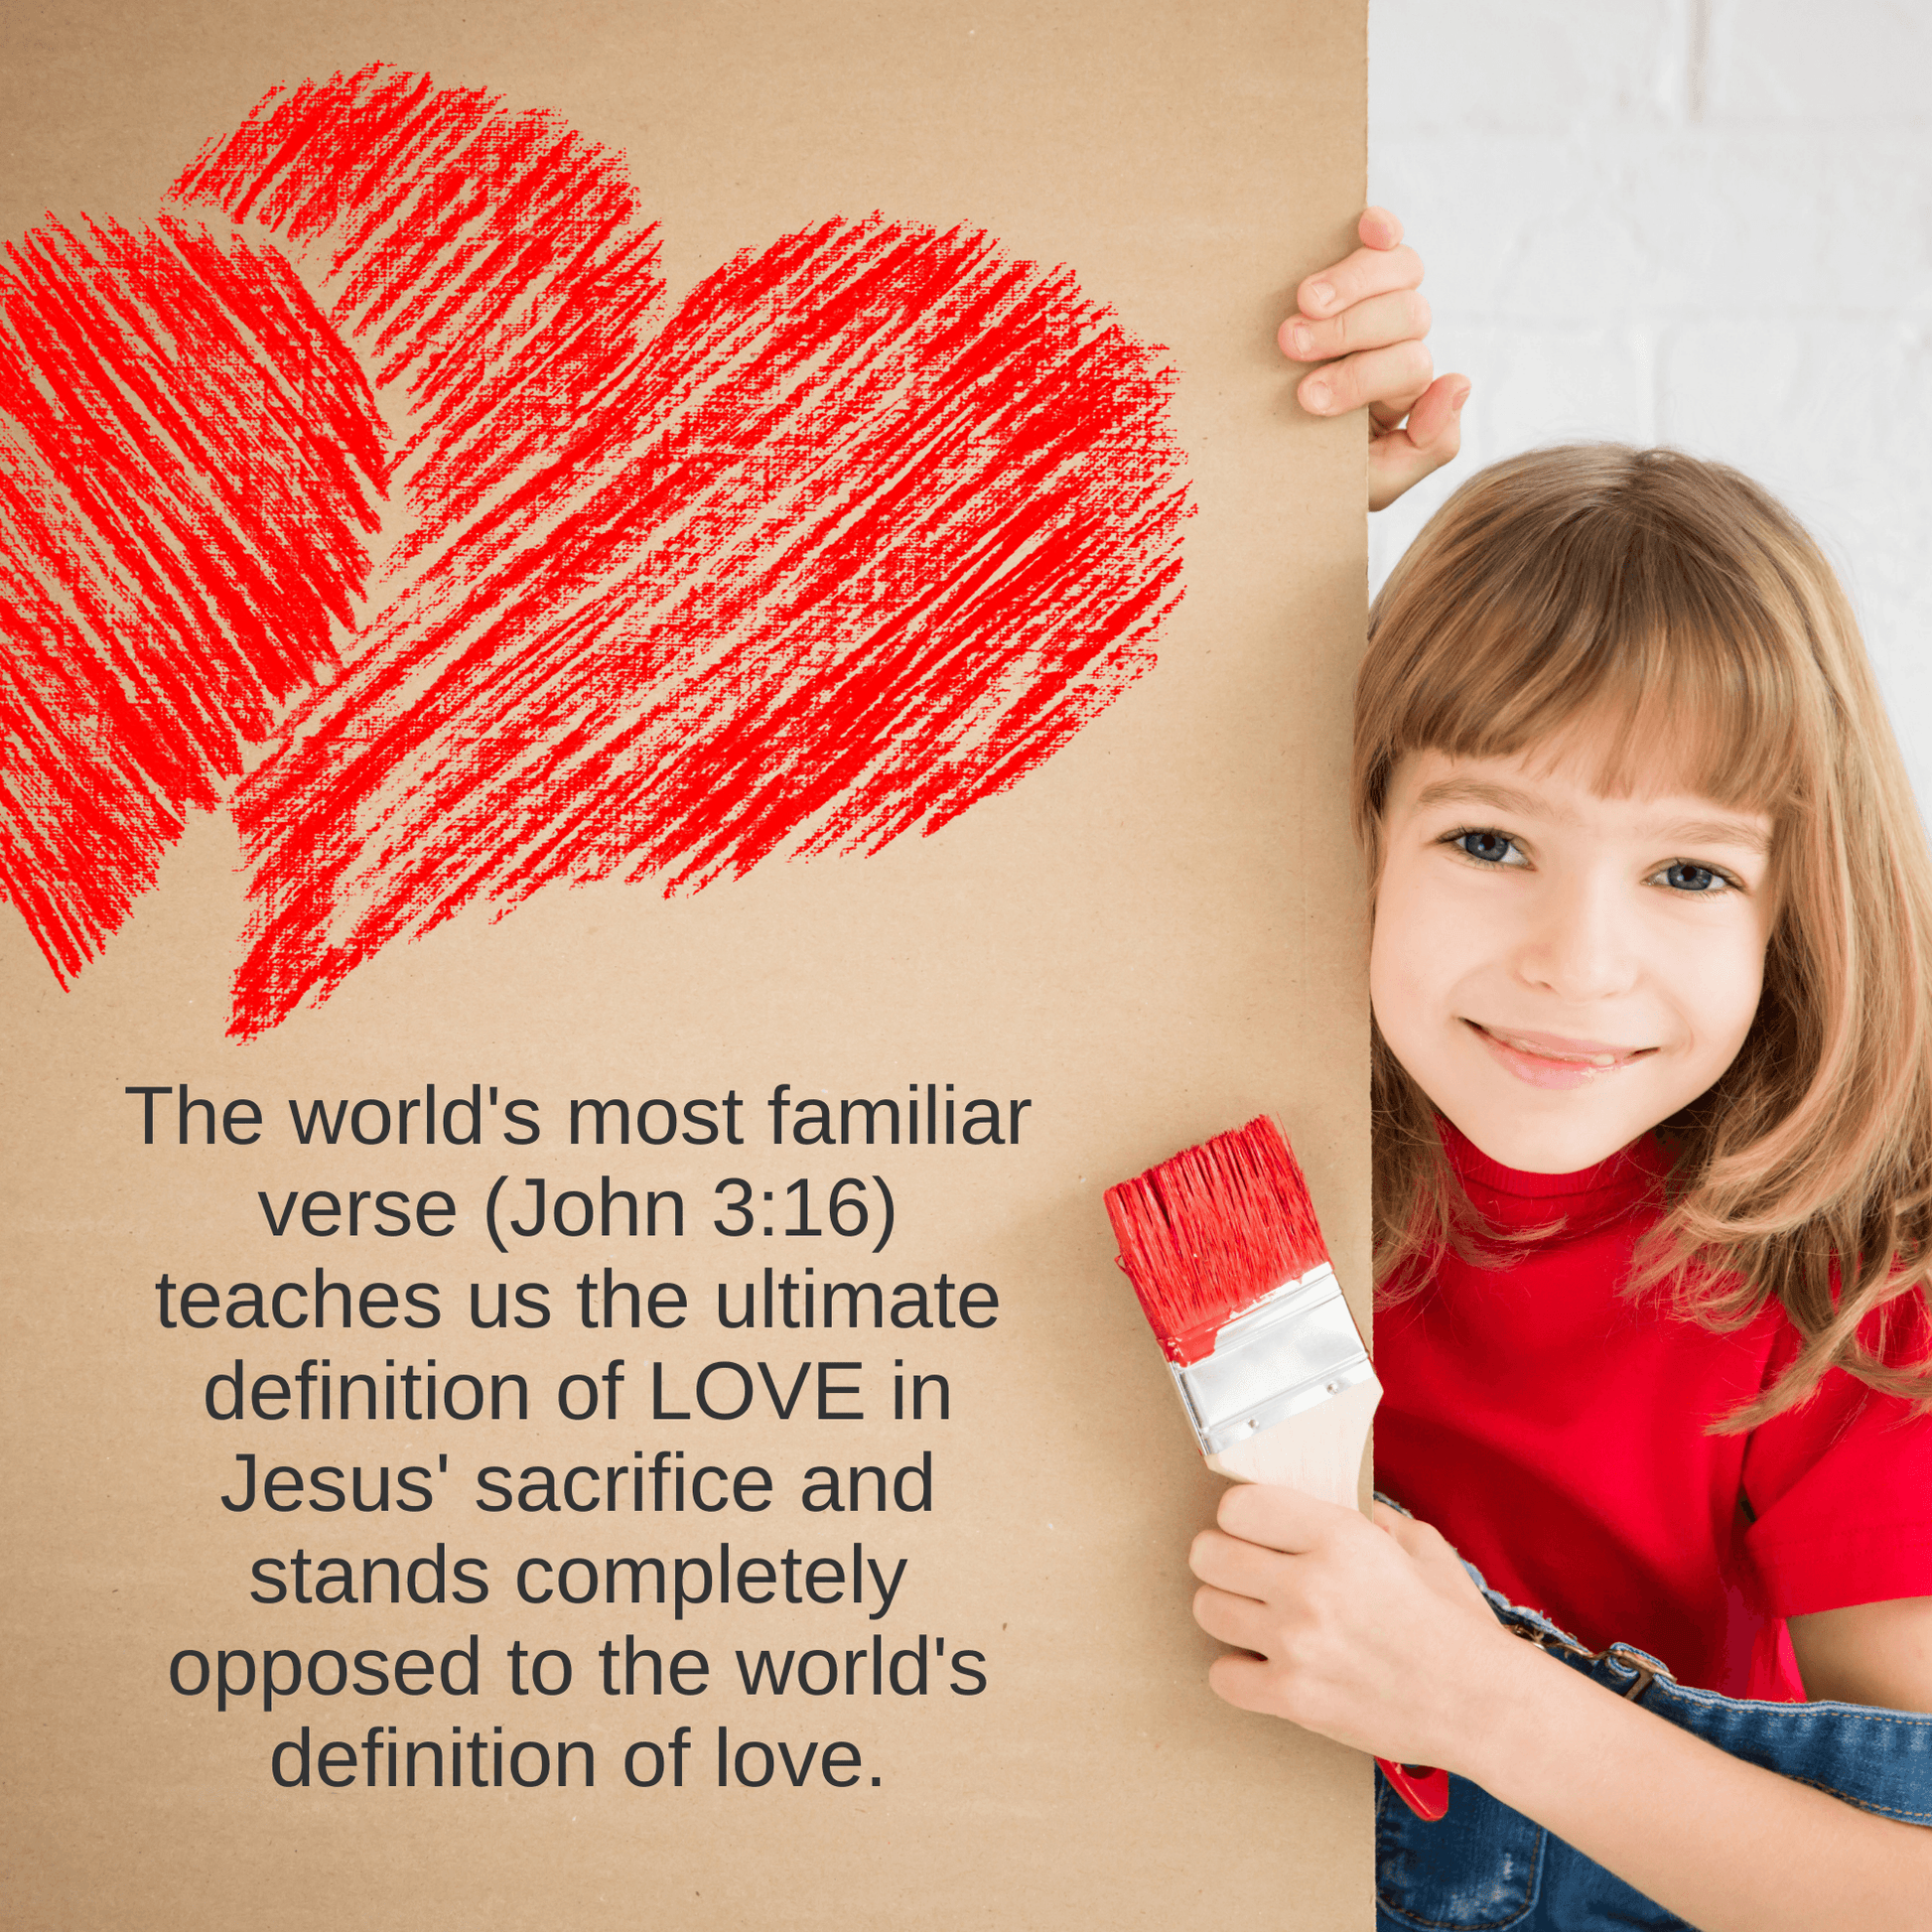 Valentine's Day Sunday School Lesson: God is Love (download) - Sunday School Store 